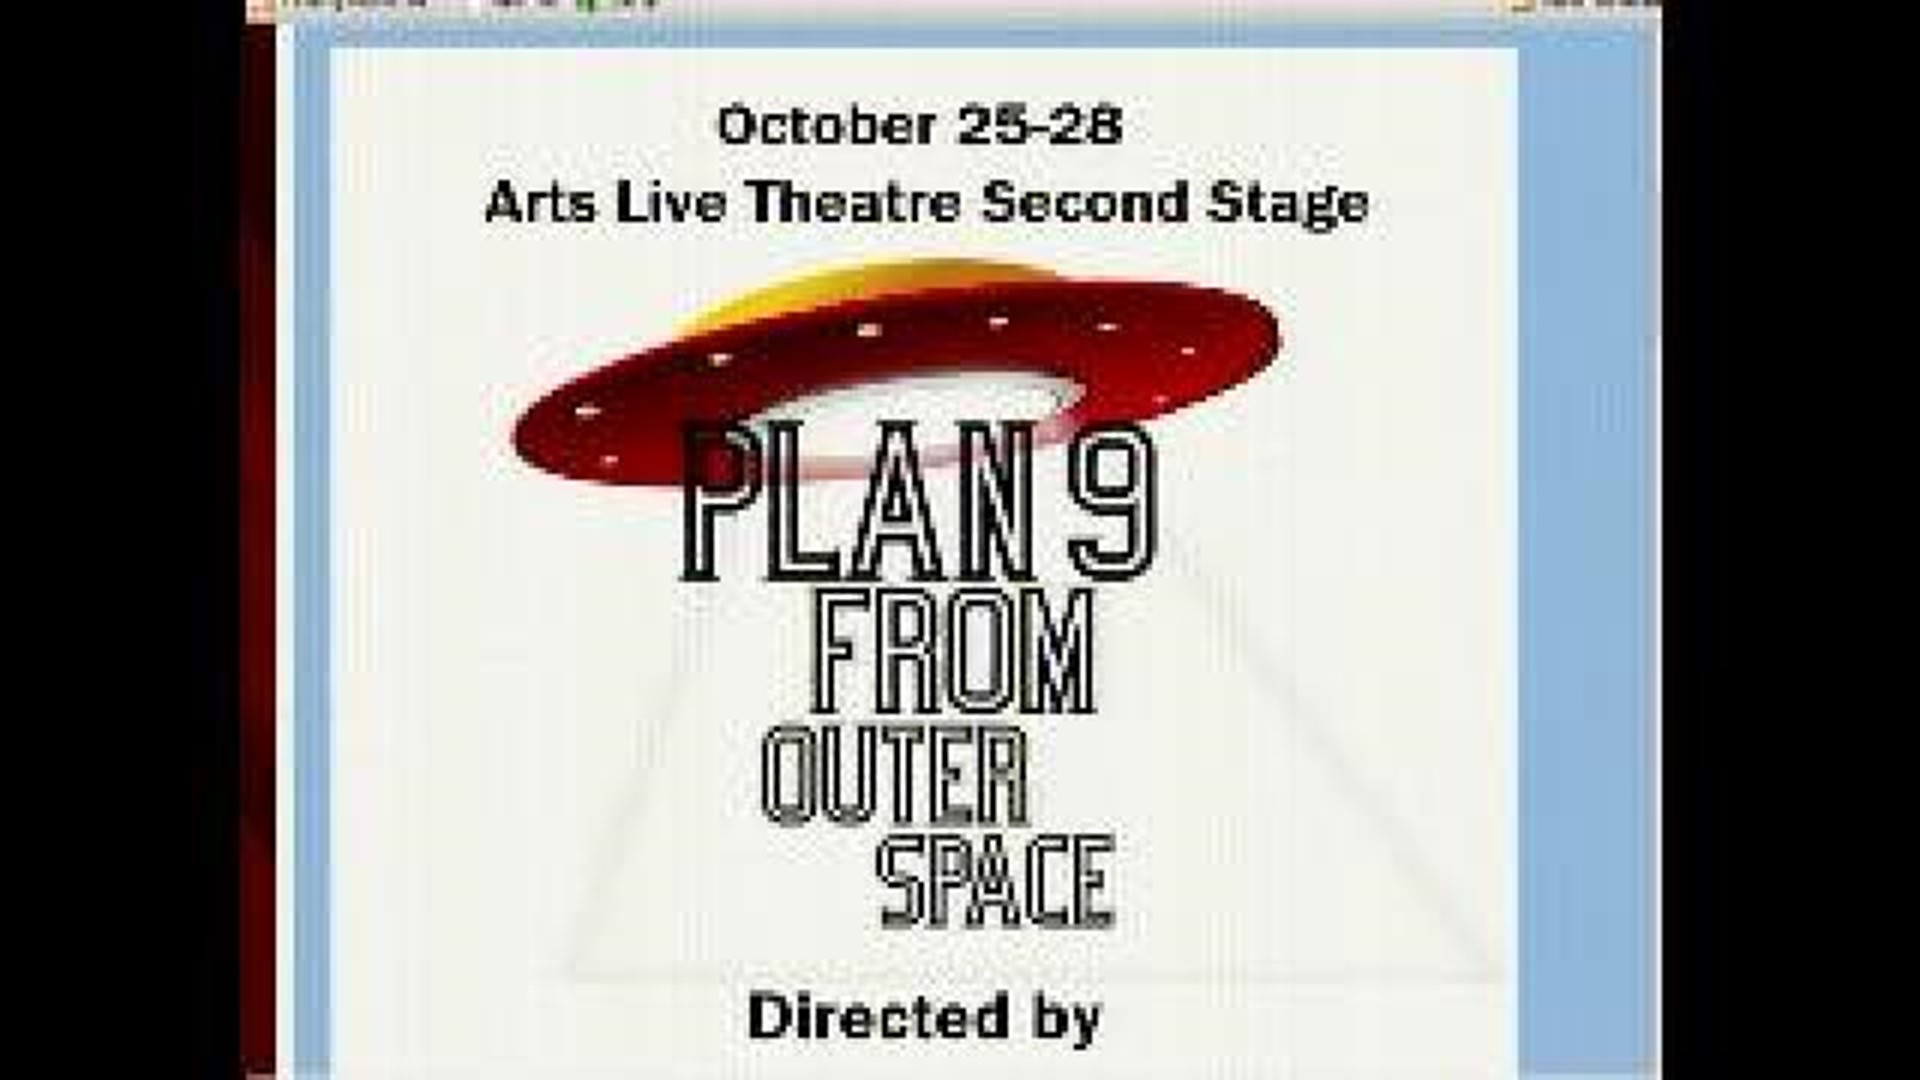 Planet 9 From Outer Space at Arts Live